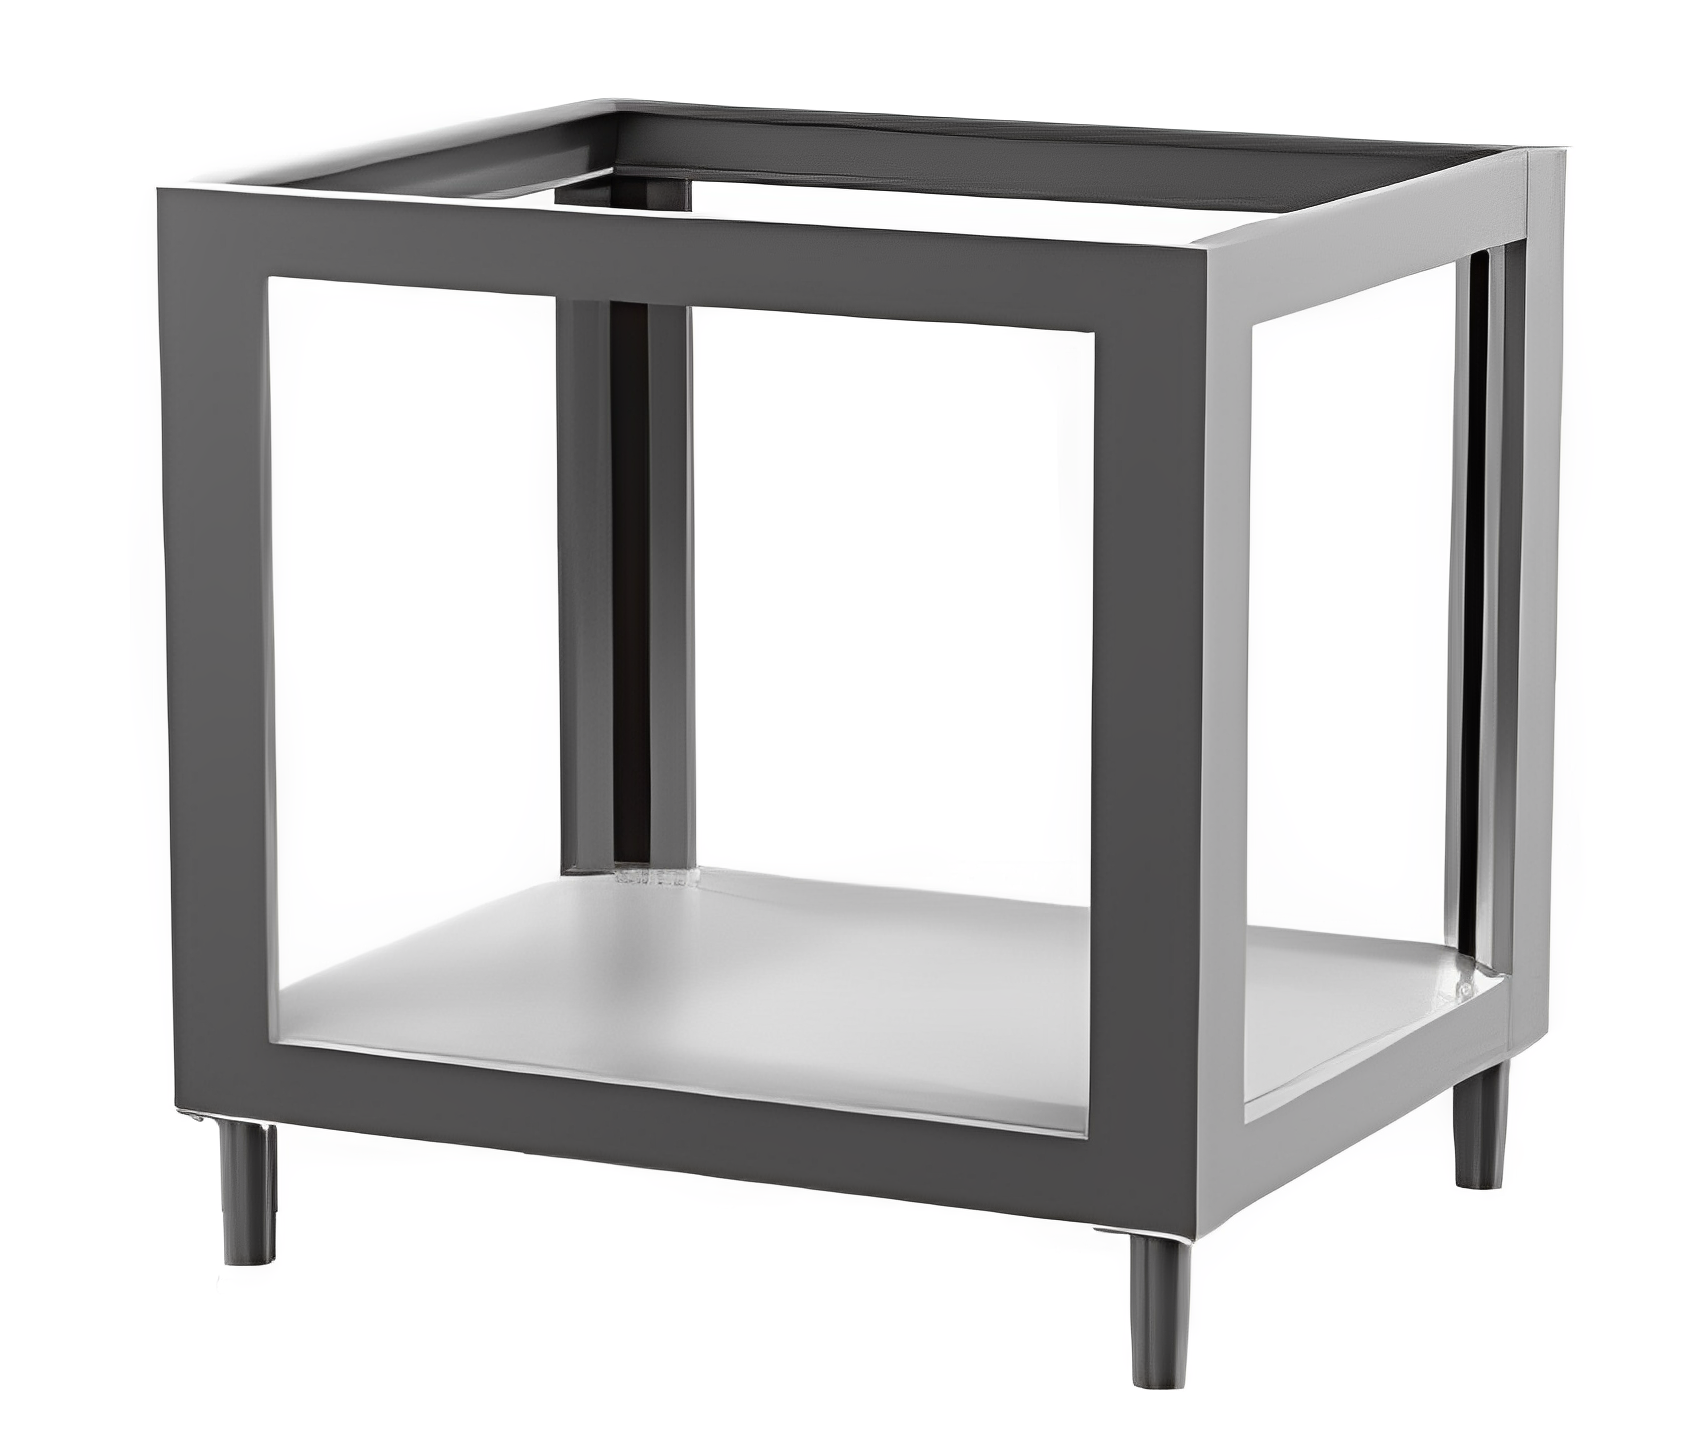 PIZZAGROUP S6 Stands in stainless steel, with service shelf.